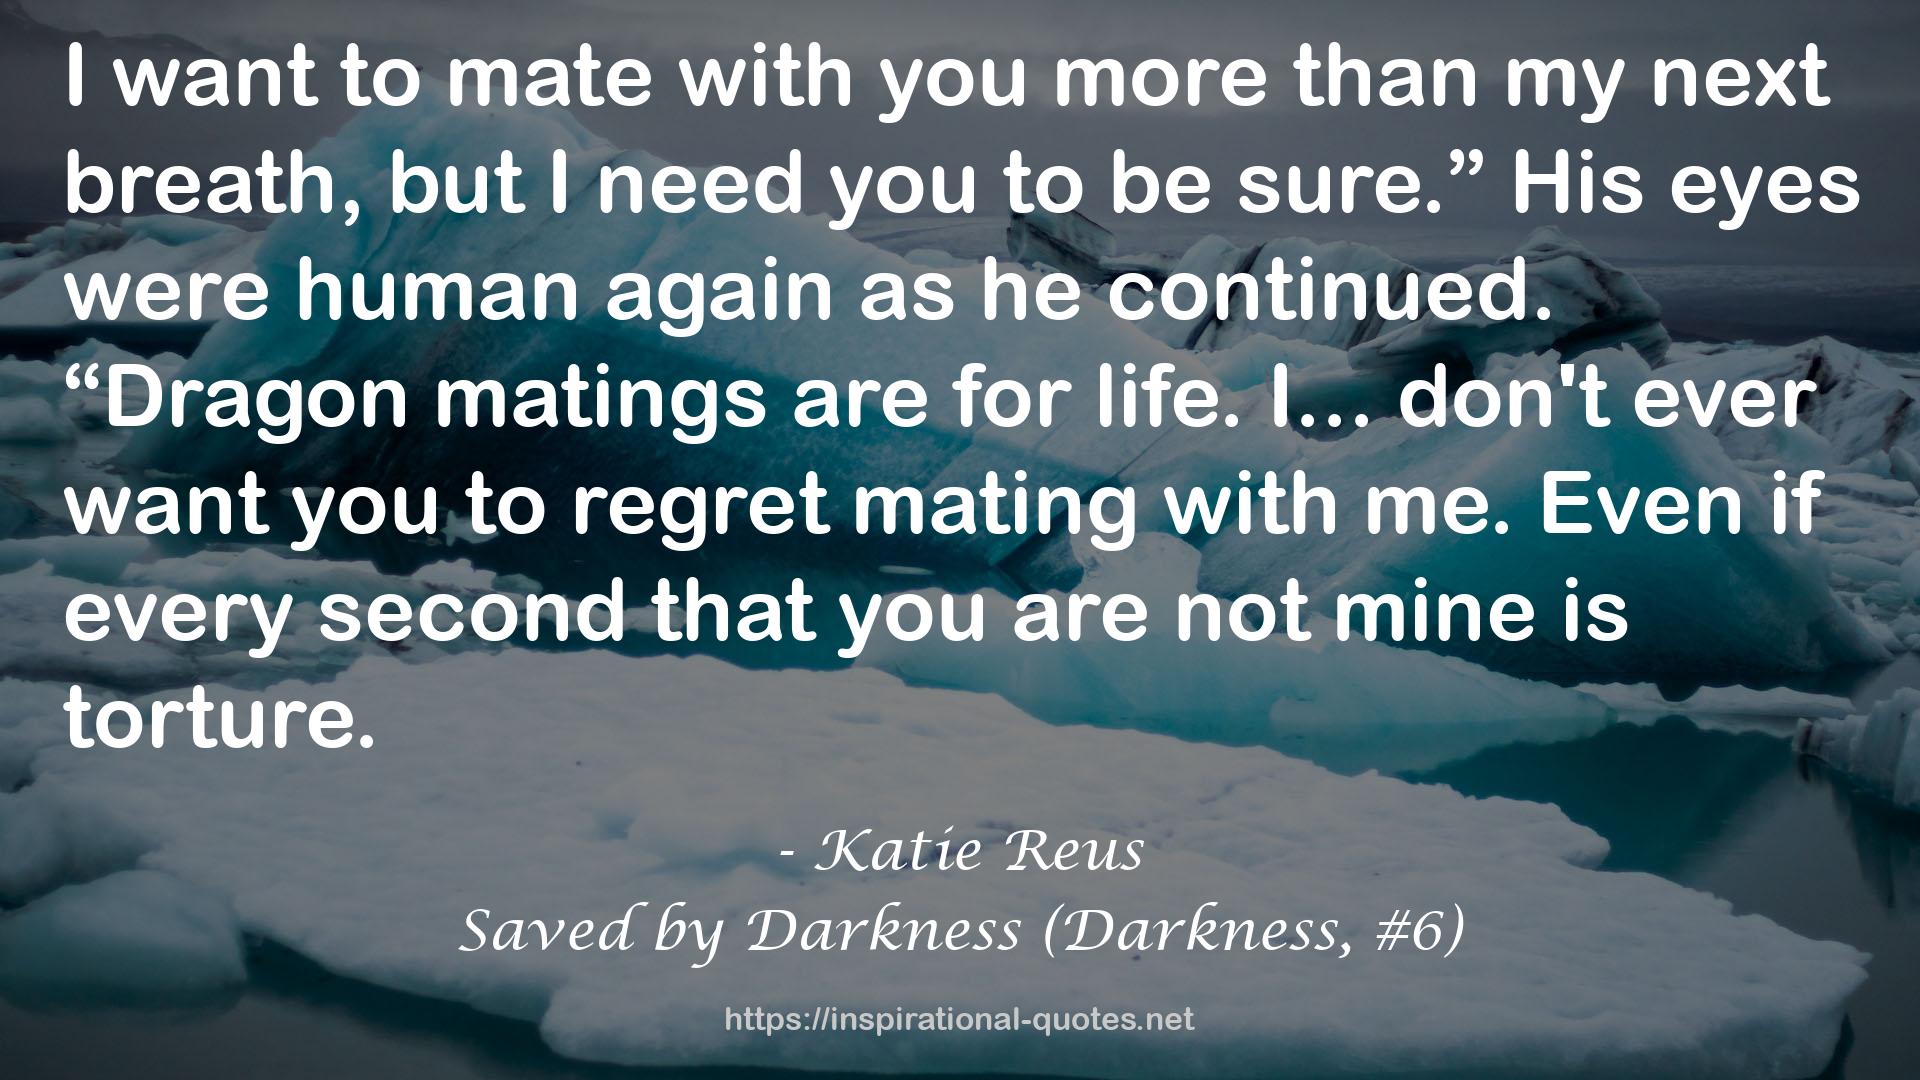 Saved by Darkness (Darkness, #6) QUOTES